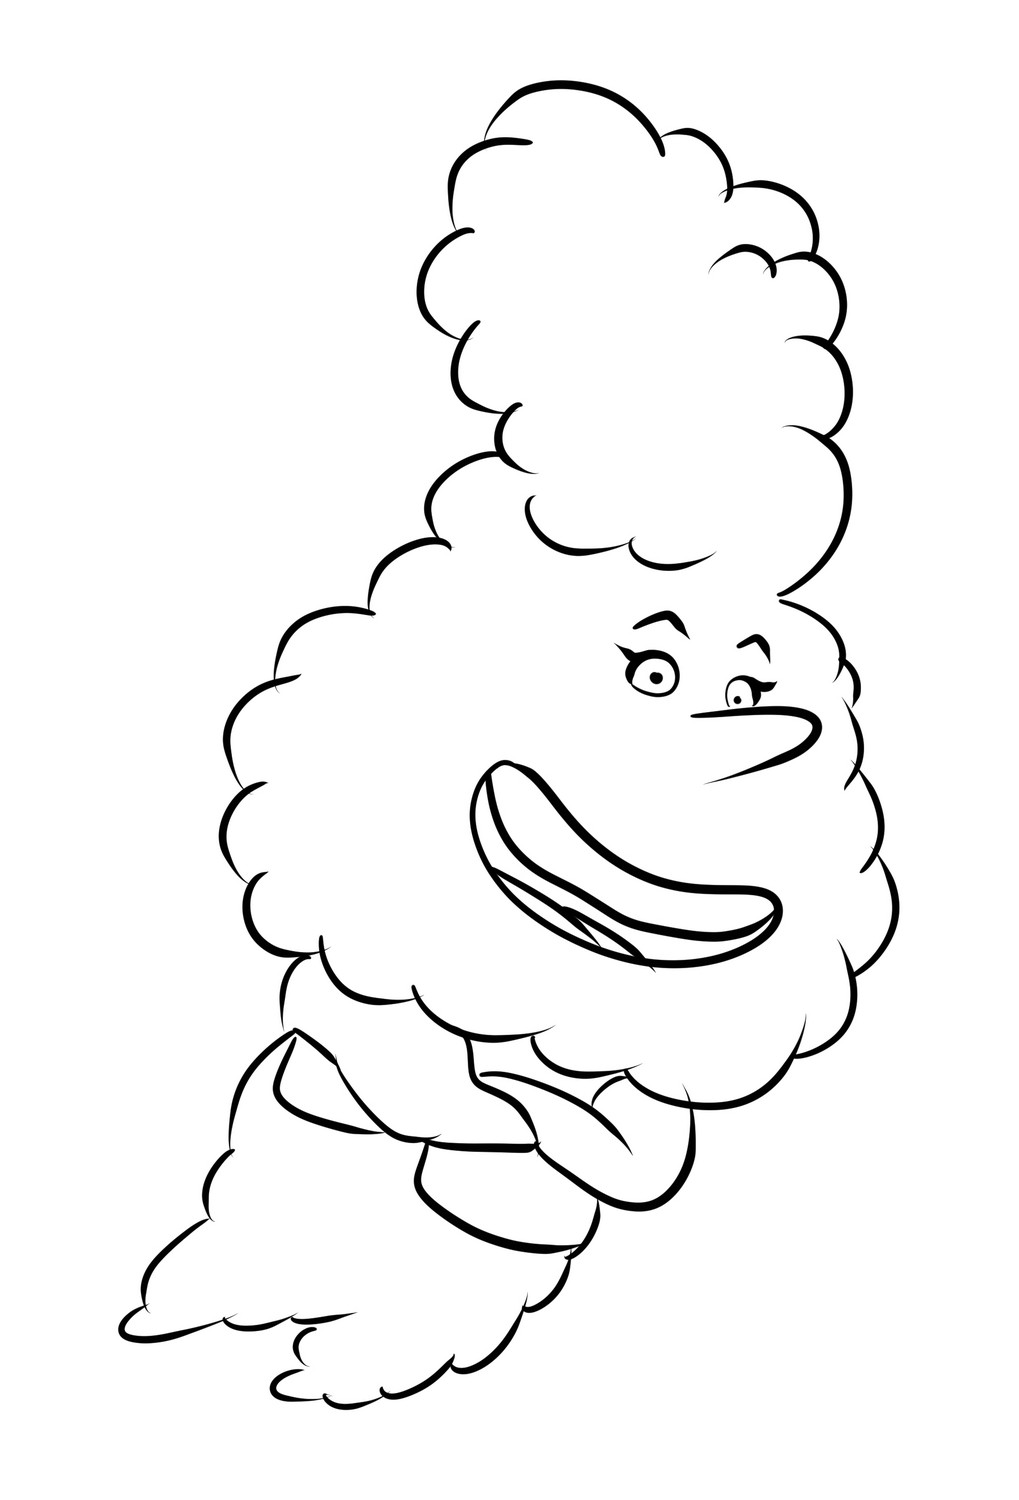 Gale Cumulus Elemental coloring page to print and coloring